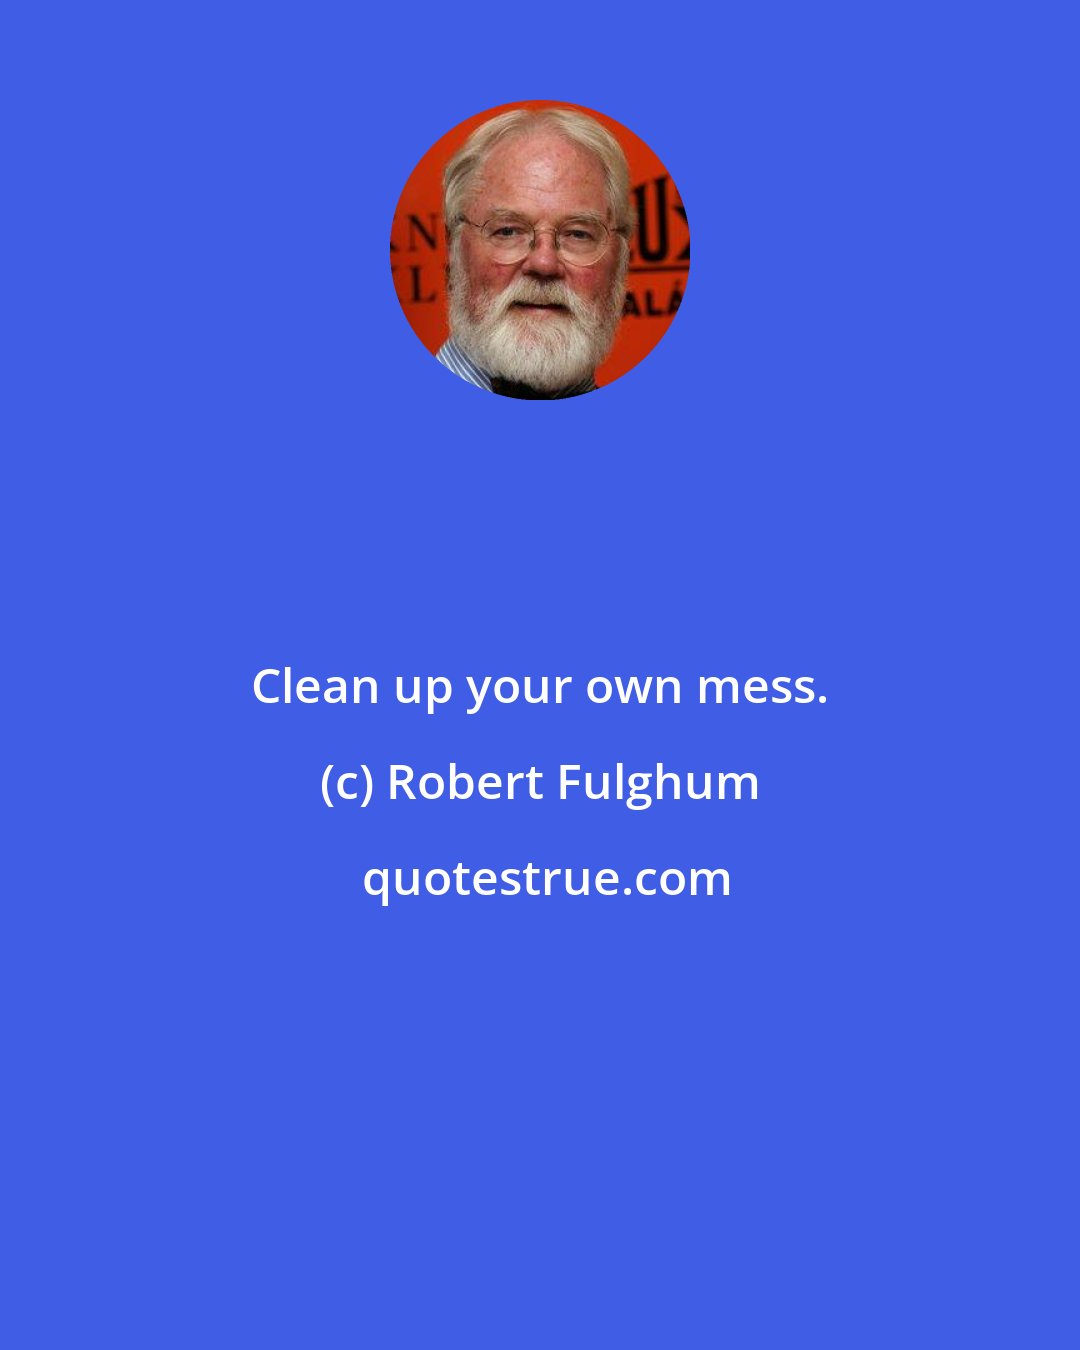 Robert Fulghum: Clean up your own mess.